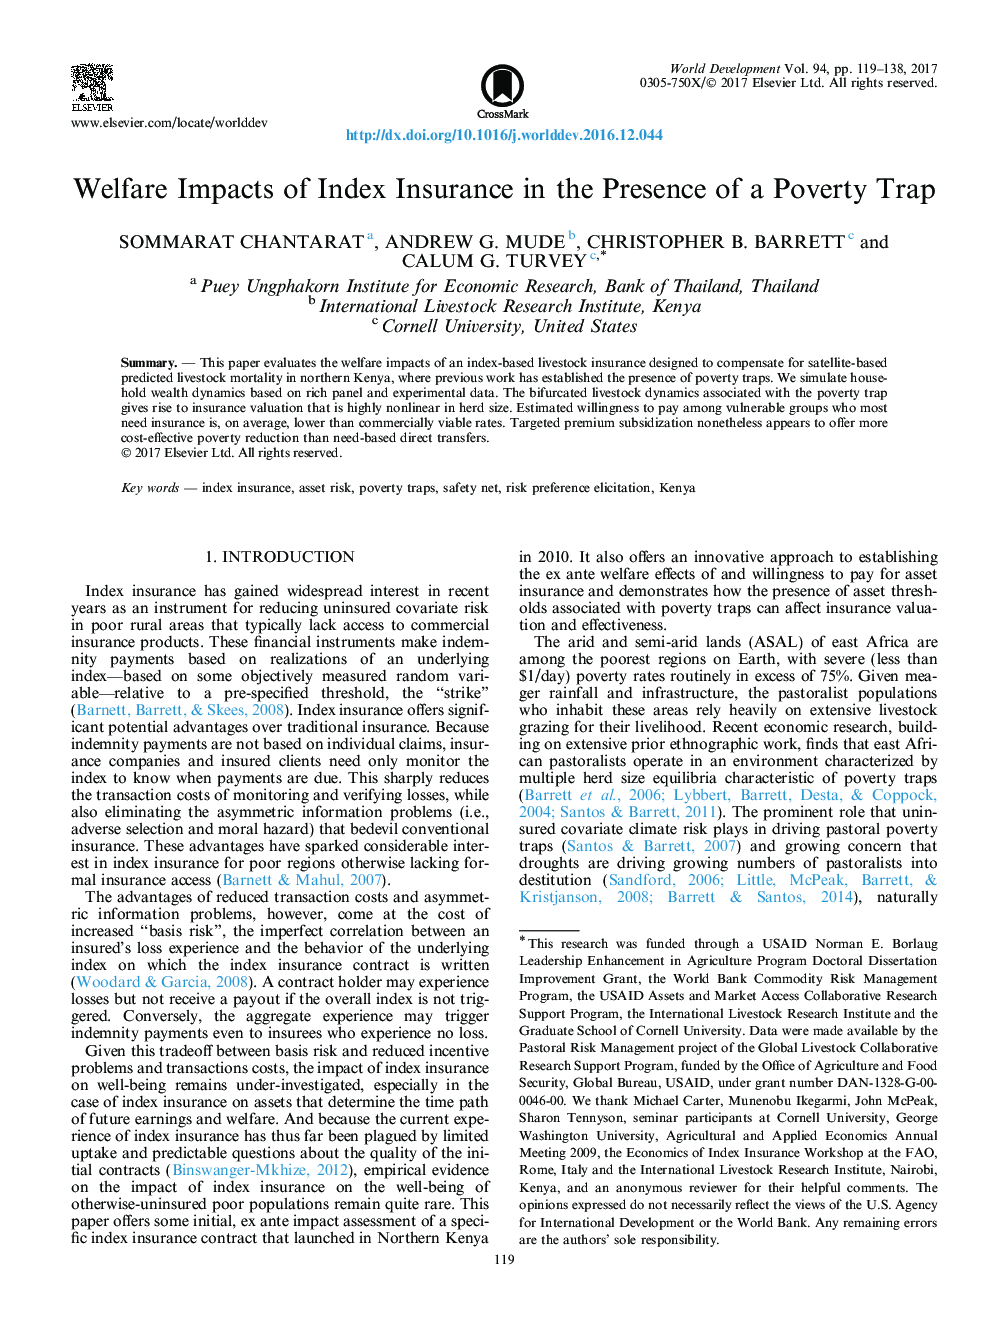 Welfare Impacts of Index Insurance in the Presence of a Poverty Trap